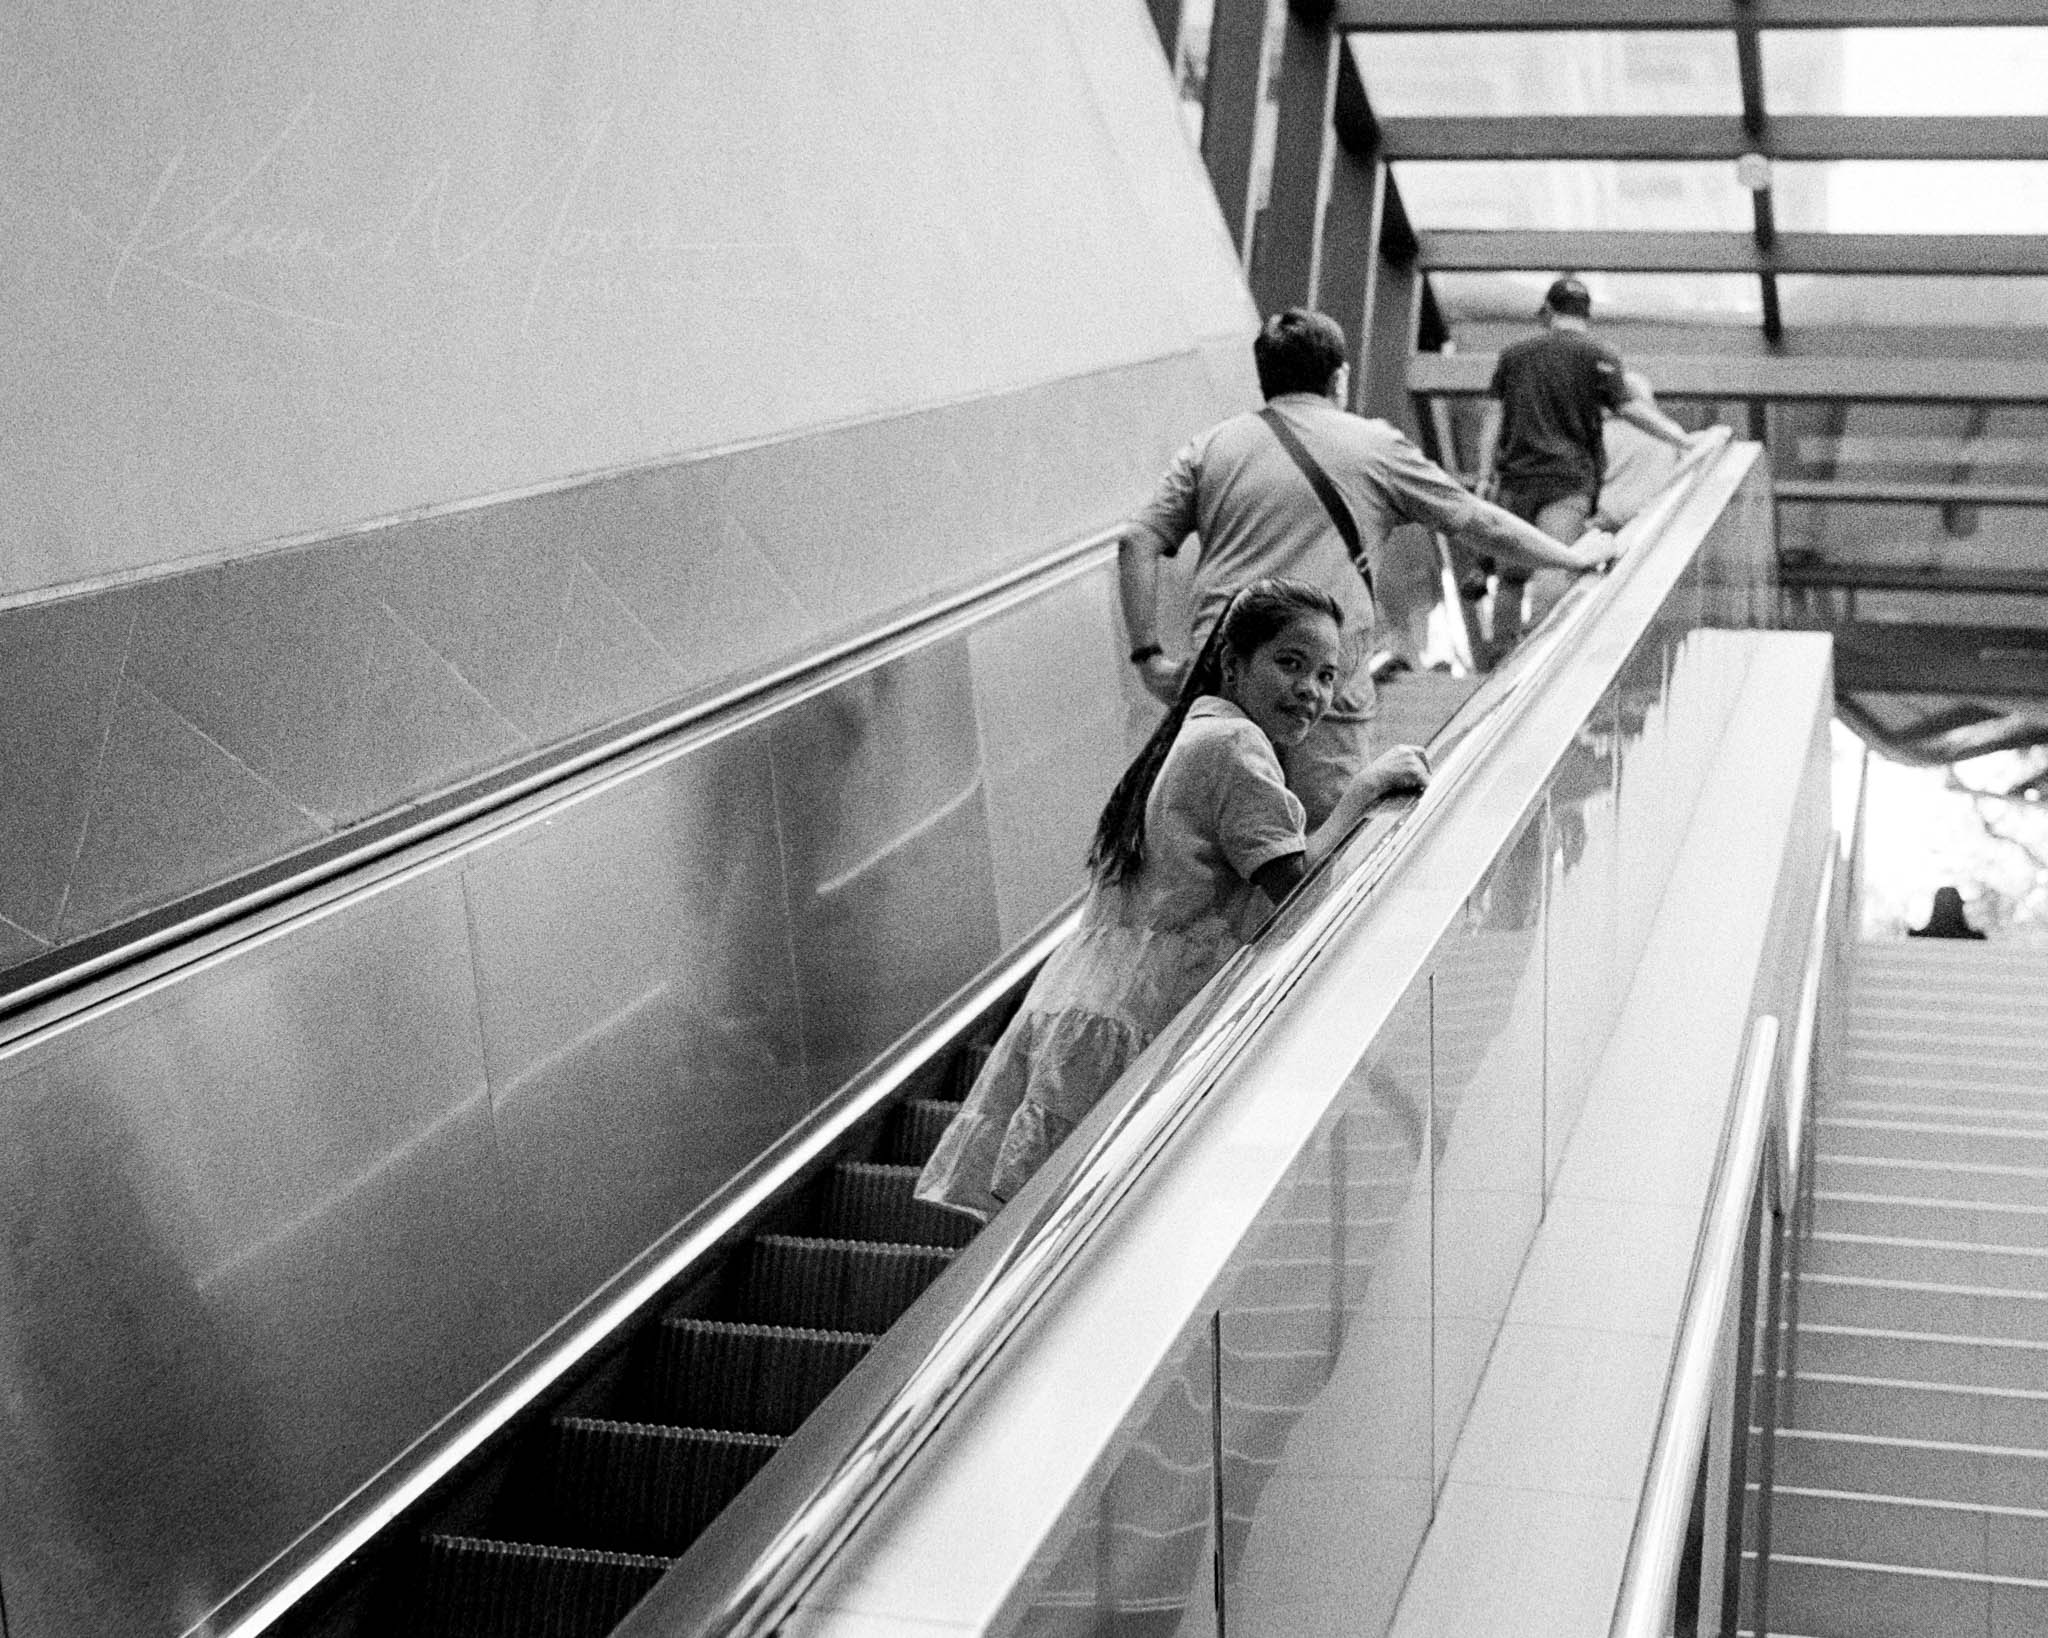 Monochrome image of people on escalator, with young woman engaging curiously with the camera.